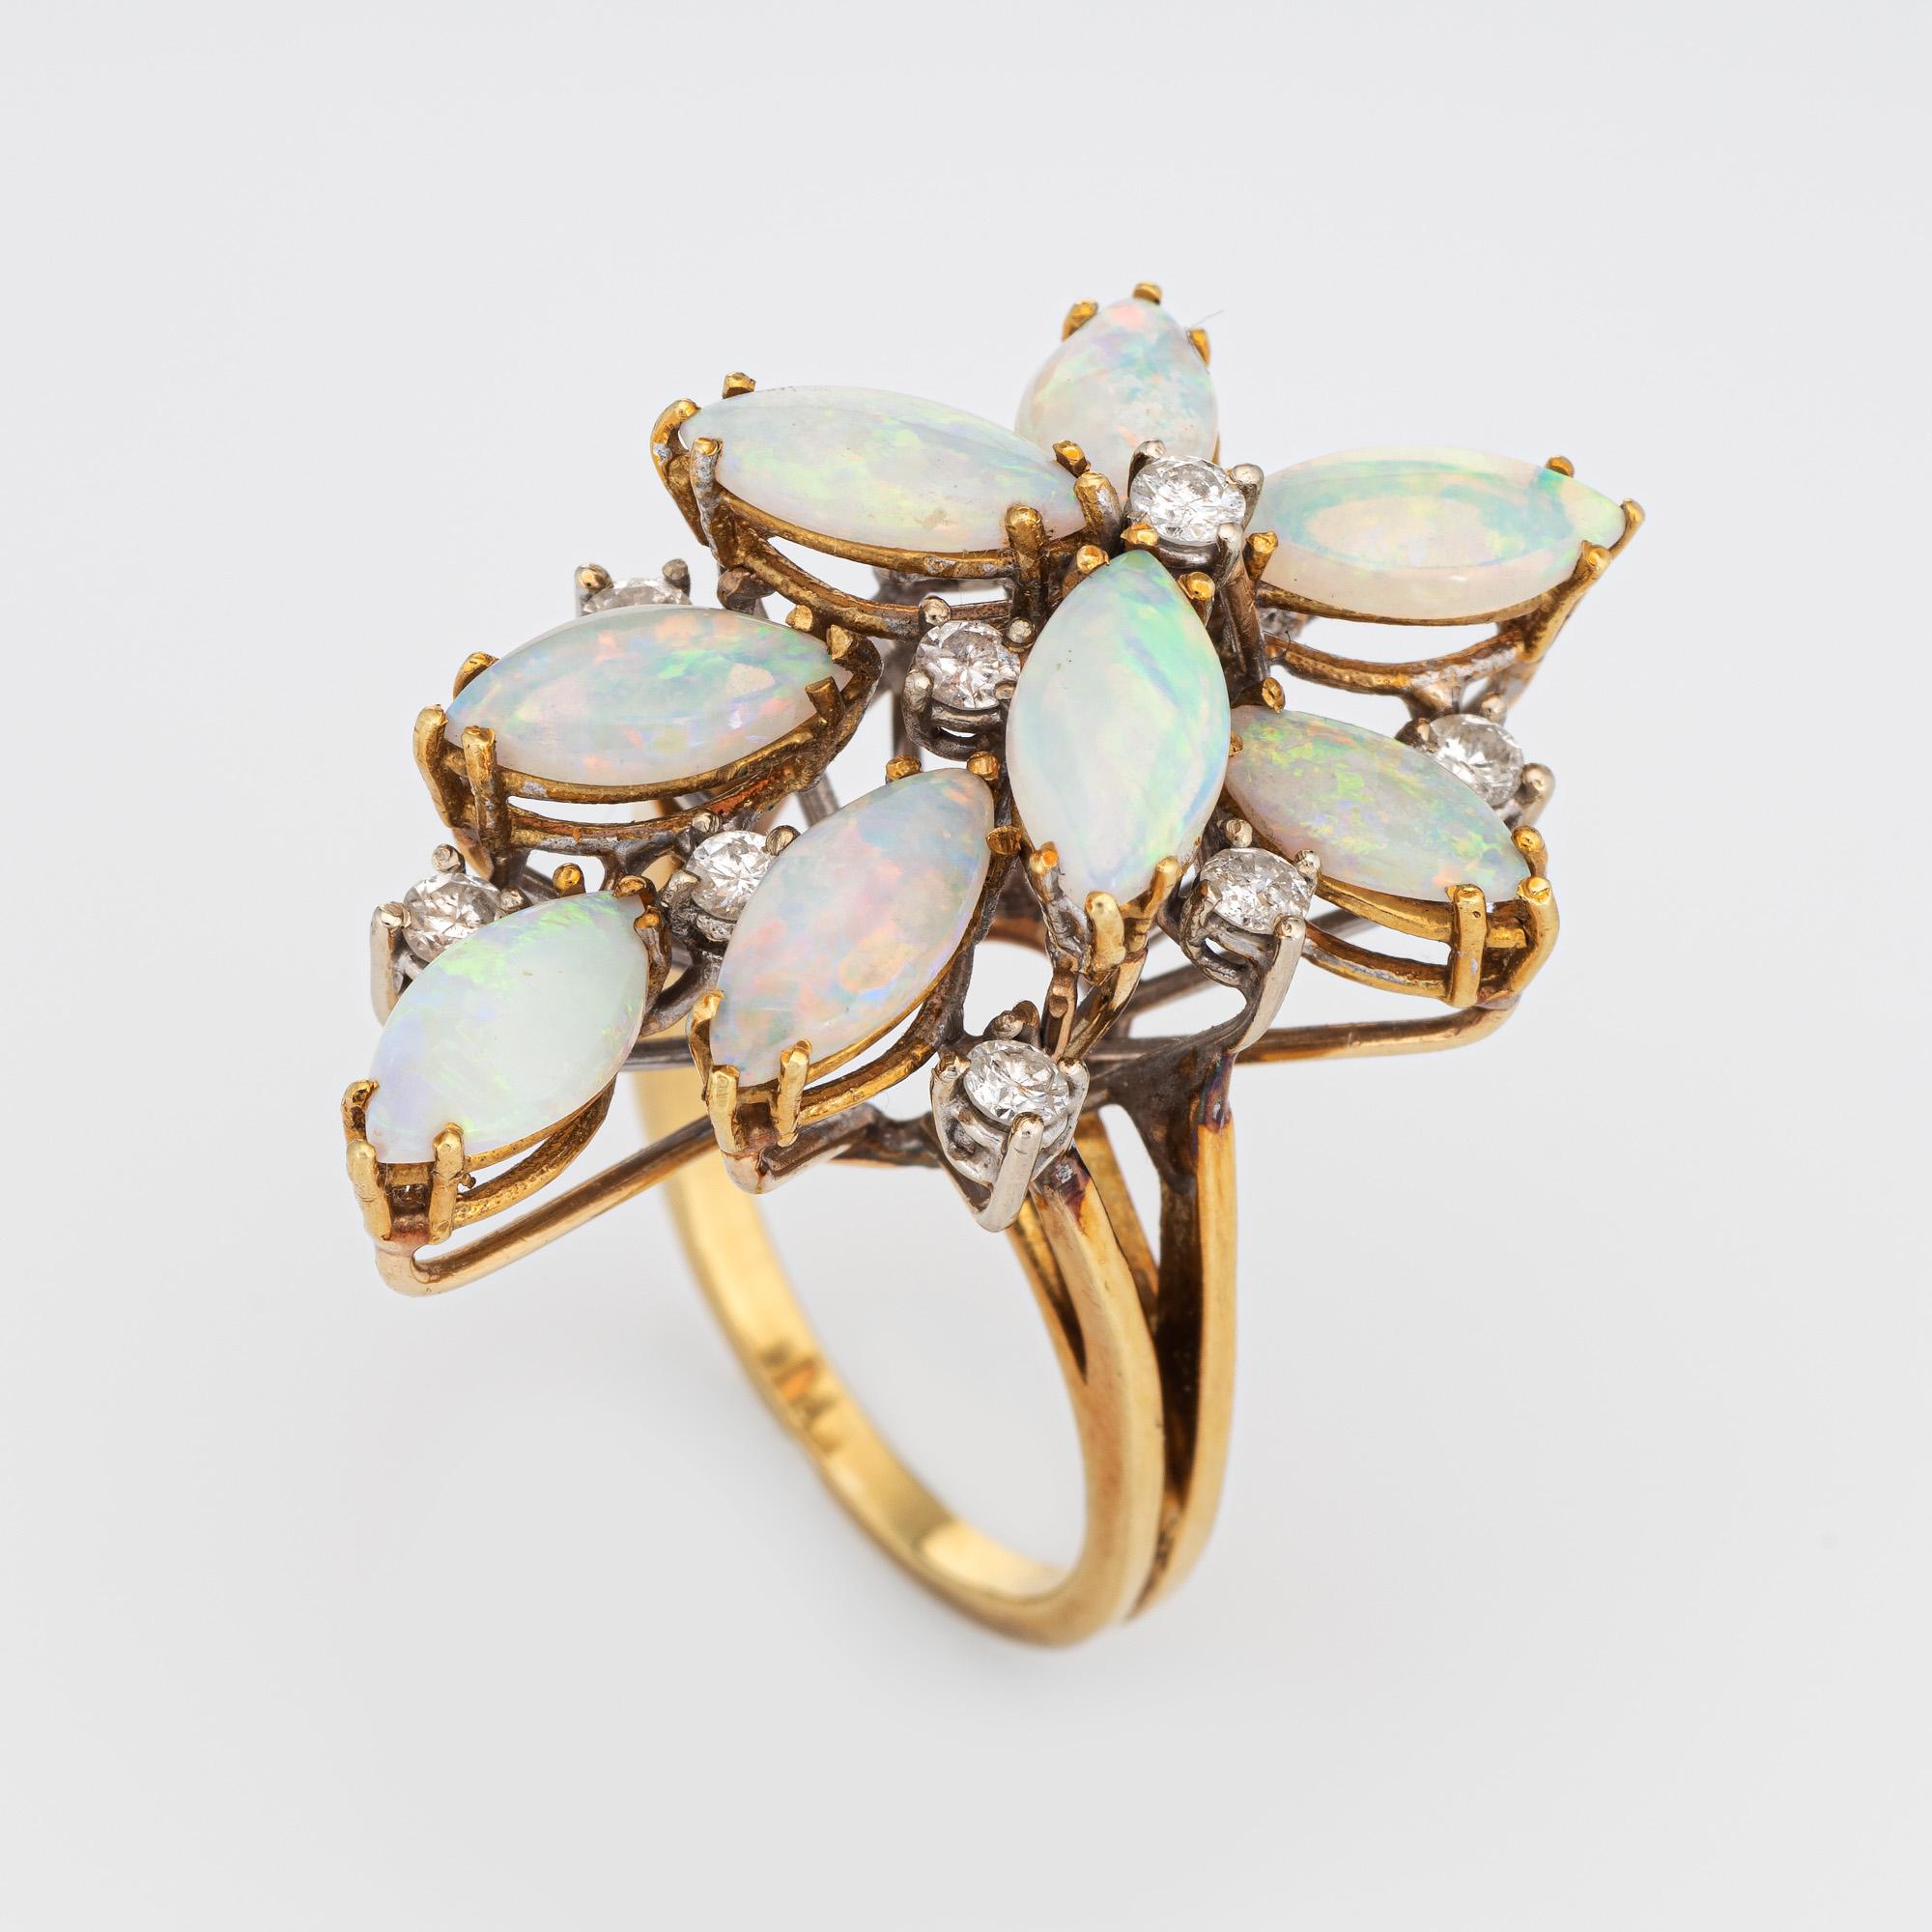 Stylish vintage opal & diamond cluster ring (circa 1970s) crafted in 14 karat yellow gold. 

Natural opals measure 10mm x 4mm (estimated at 0.50 carats each - 4 carats total estimated weight). 11 round brilliant cut diamonds are estimated at 0.05